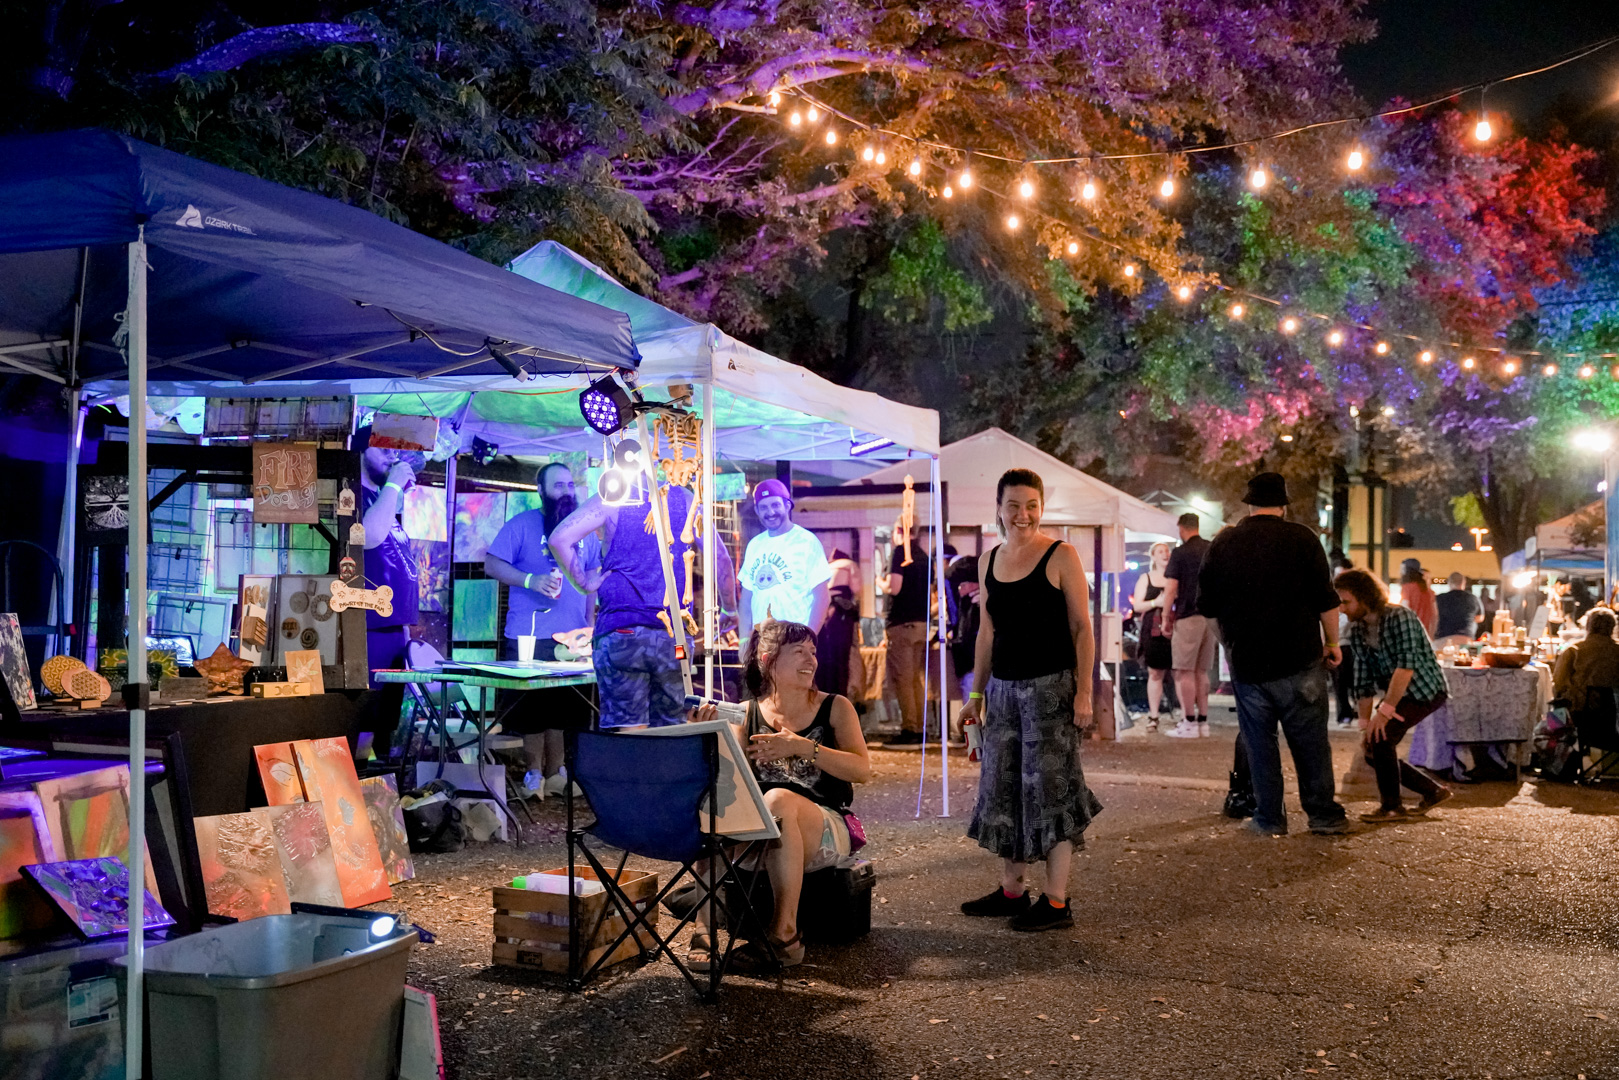 Vendor booths set up outside in colorful night scene